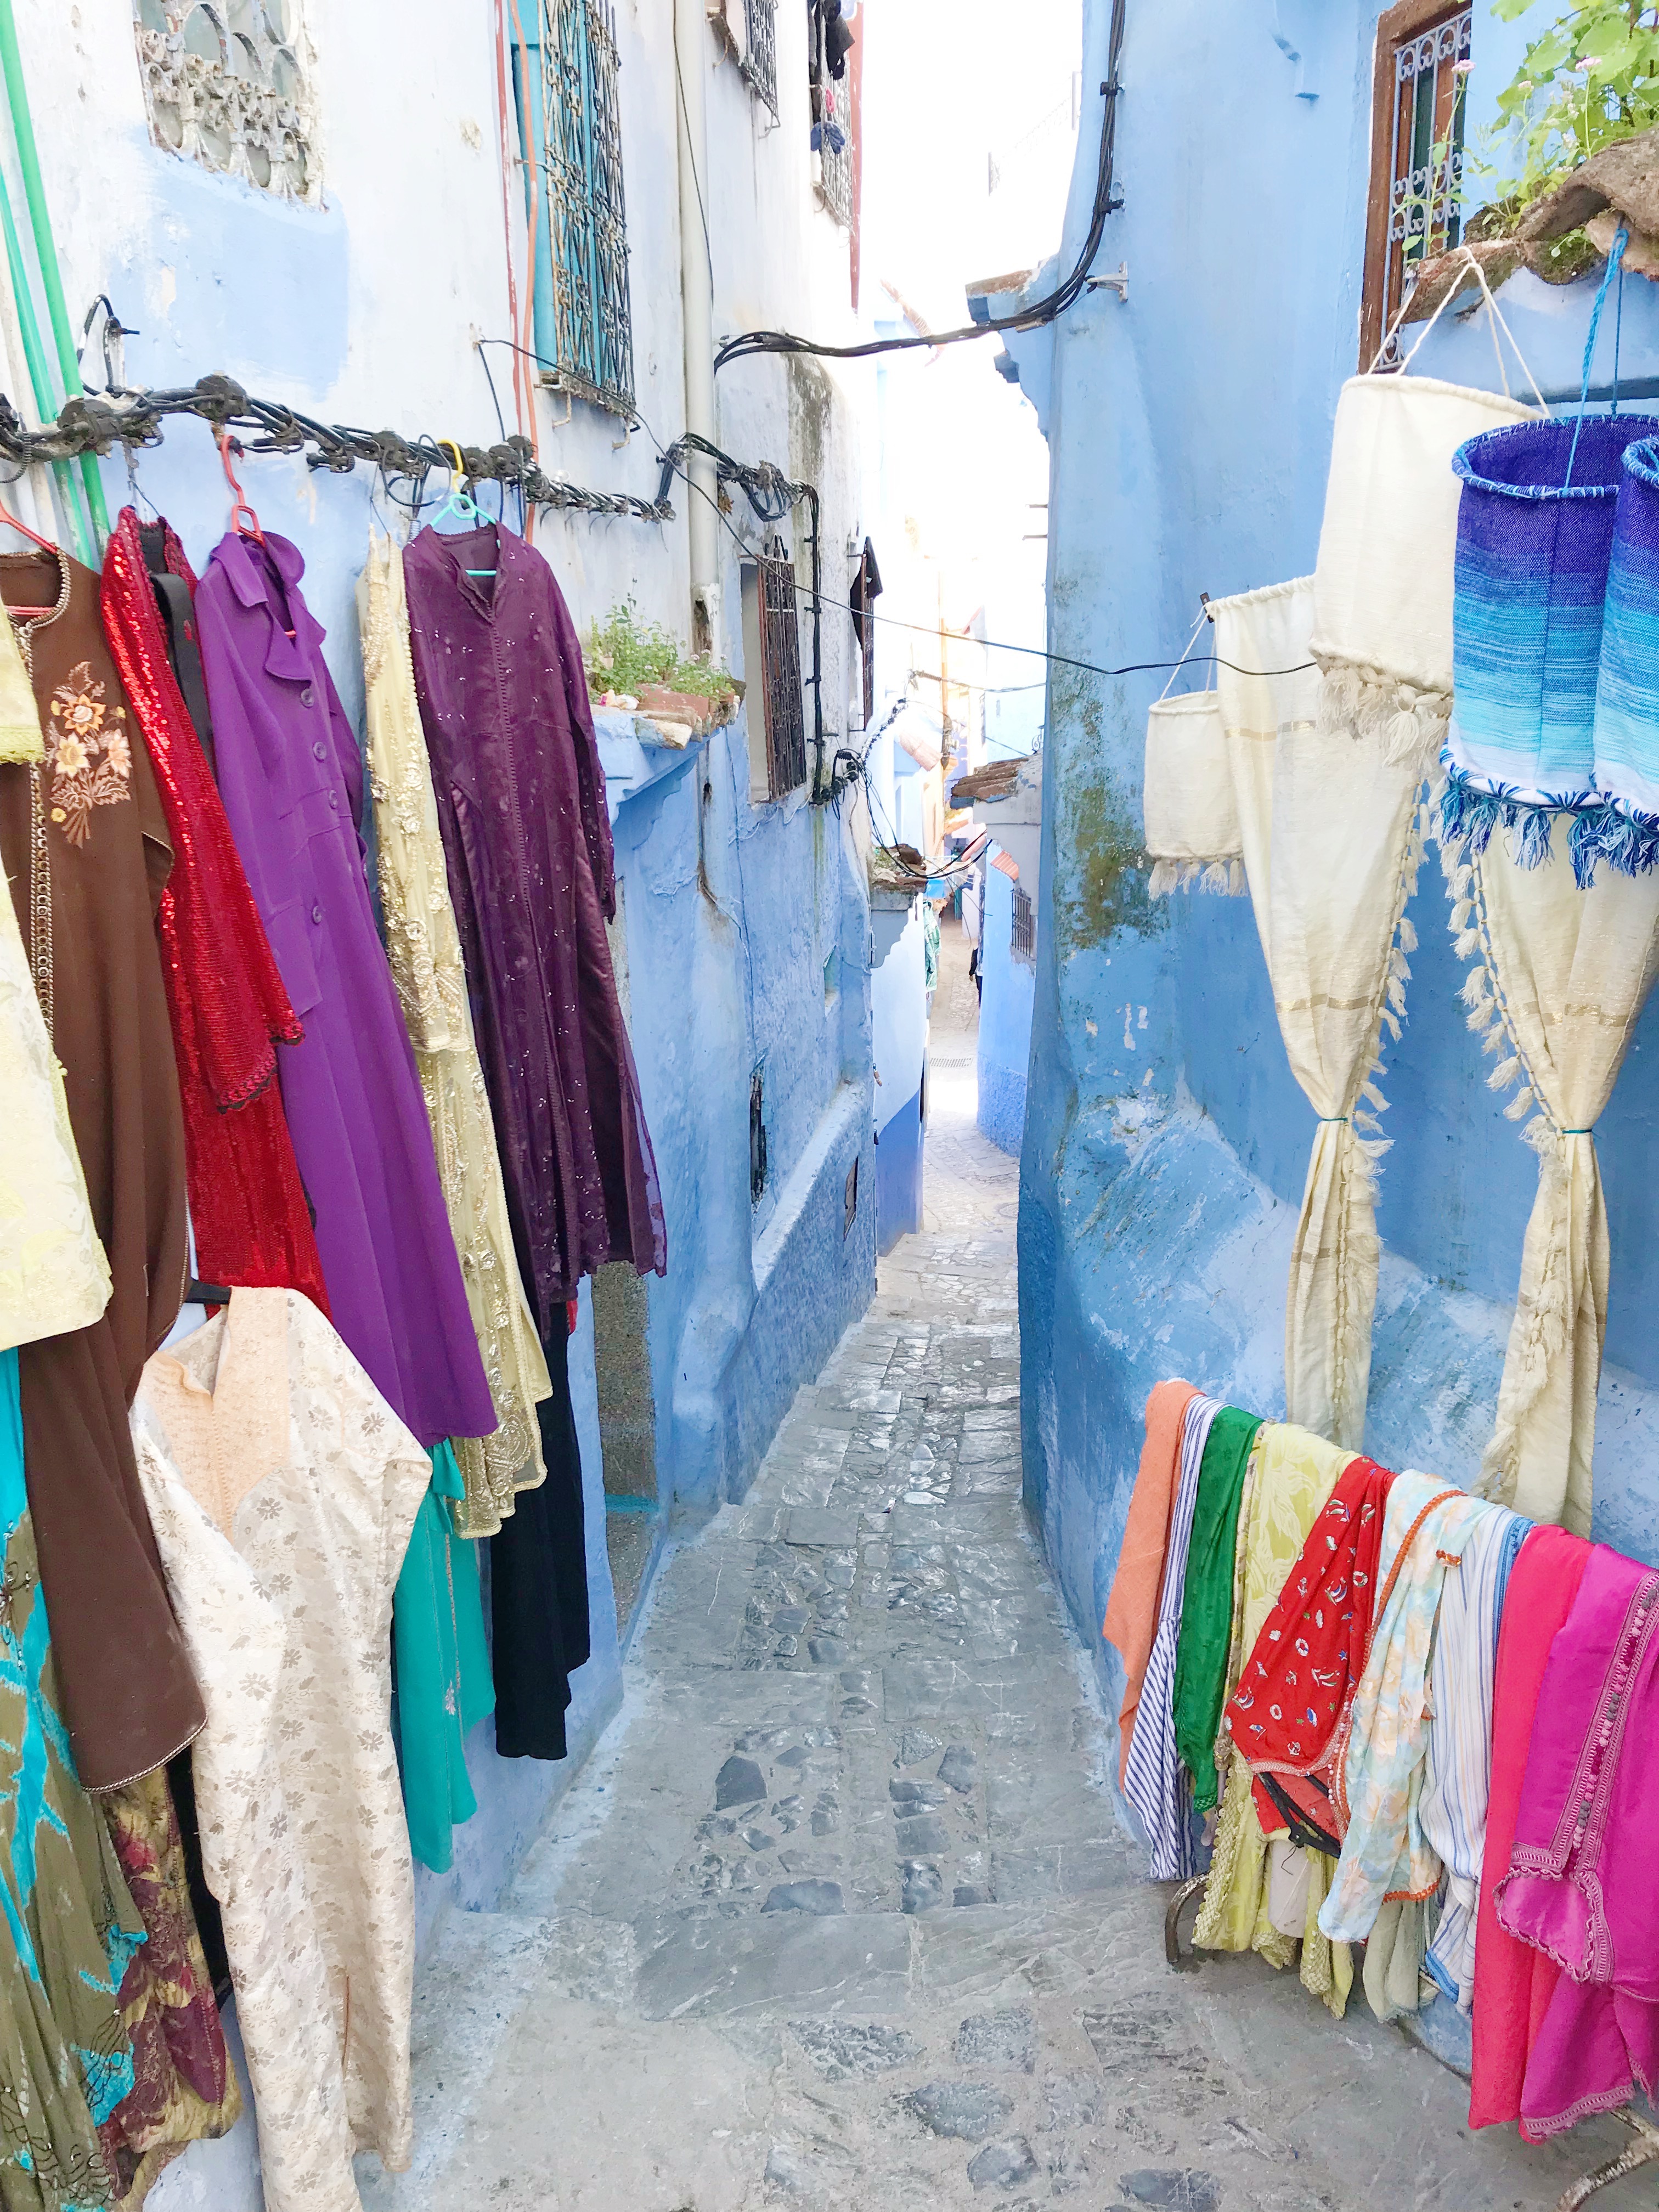 HOW TO SPEND A DAY IN CHEFCHAOUEN | chefchaouen morocco - Chefchaouen - Fes to Chefchaouen - Morocco Blue City - Traveling In Morocco - Day Trip to Chefchaouen - Morocco Travel Blog - Blue City Morocco - City of Chefchaouen - #morocco #chefchaouen #travelblog